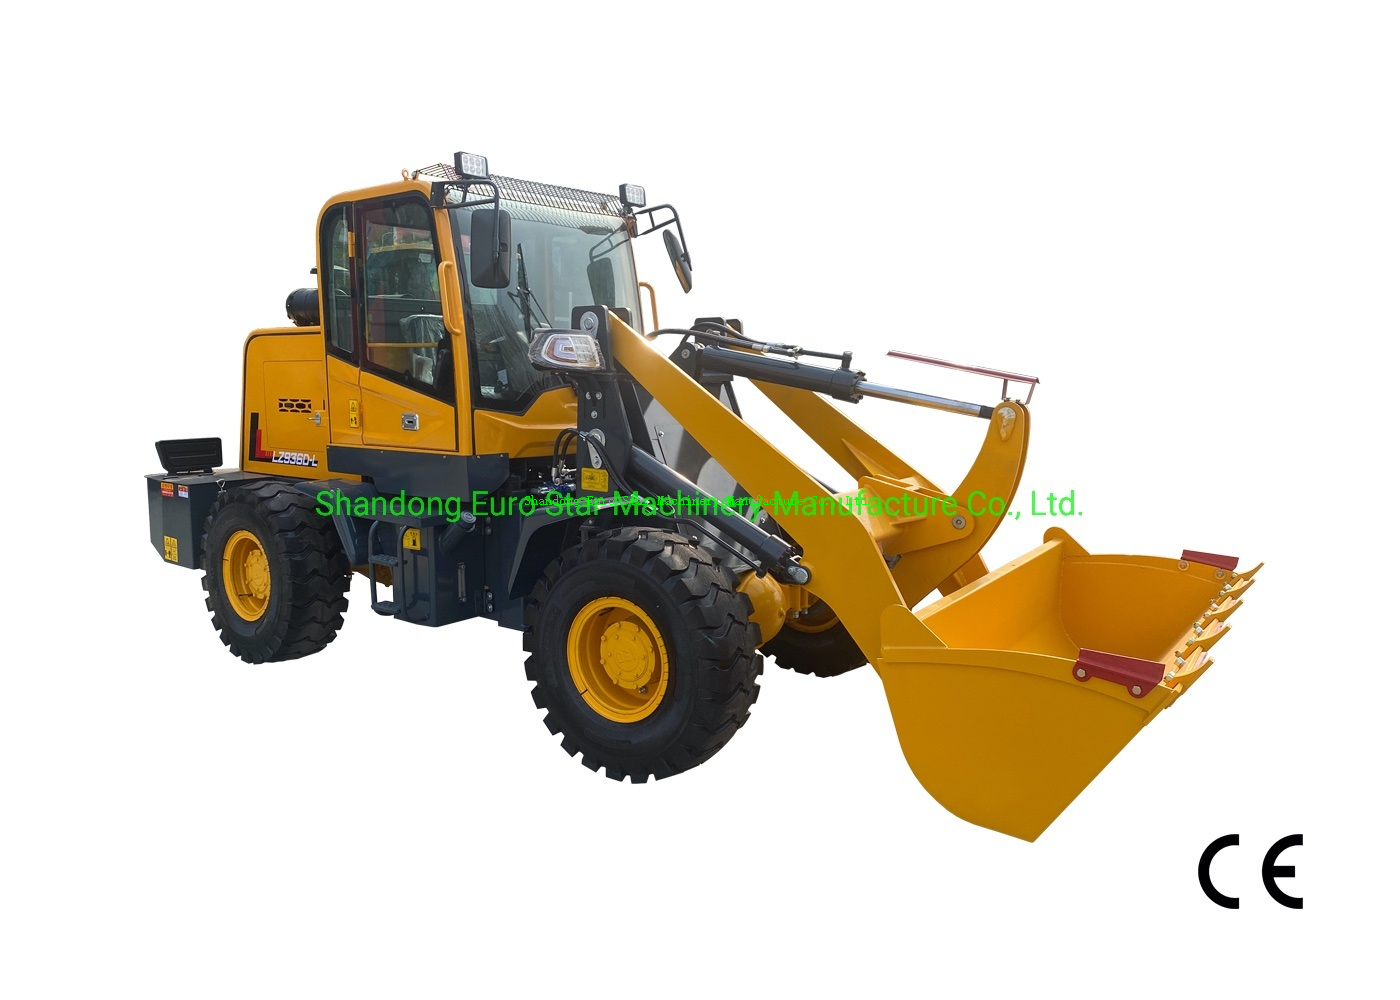 1-6t-Ez936-Wheel-Loader-Multi-Functional-Mini-Small-CE-Approved-China-Farm-Construction-Medium-Bucket-Machinery-Compact-Backhoe-Excavator-Front-End-Loader (10).jpg